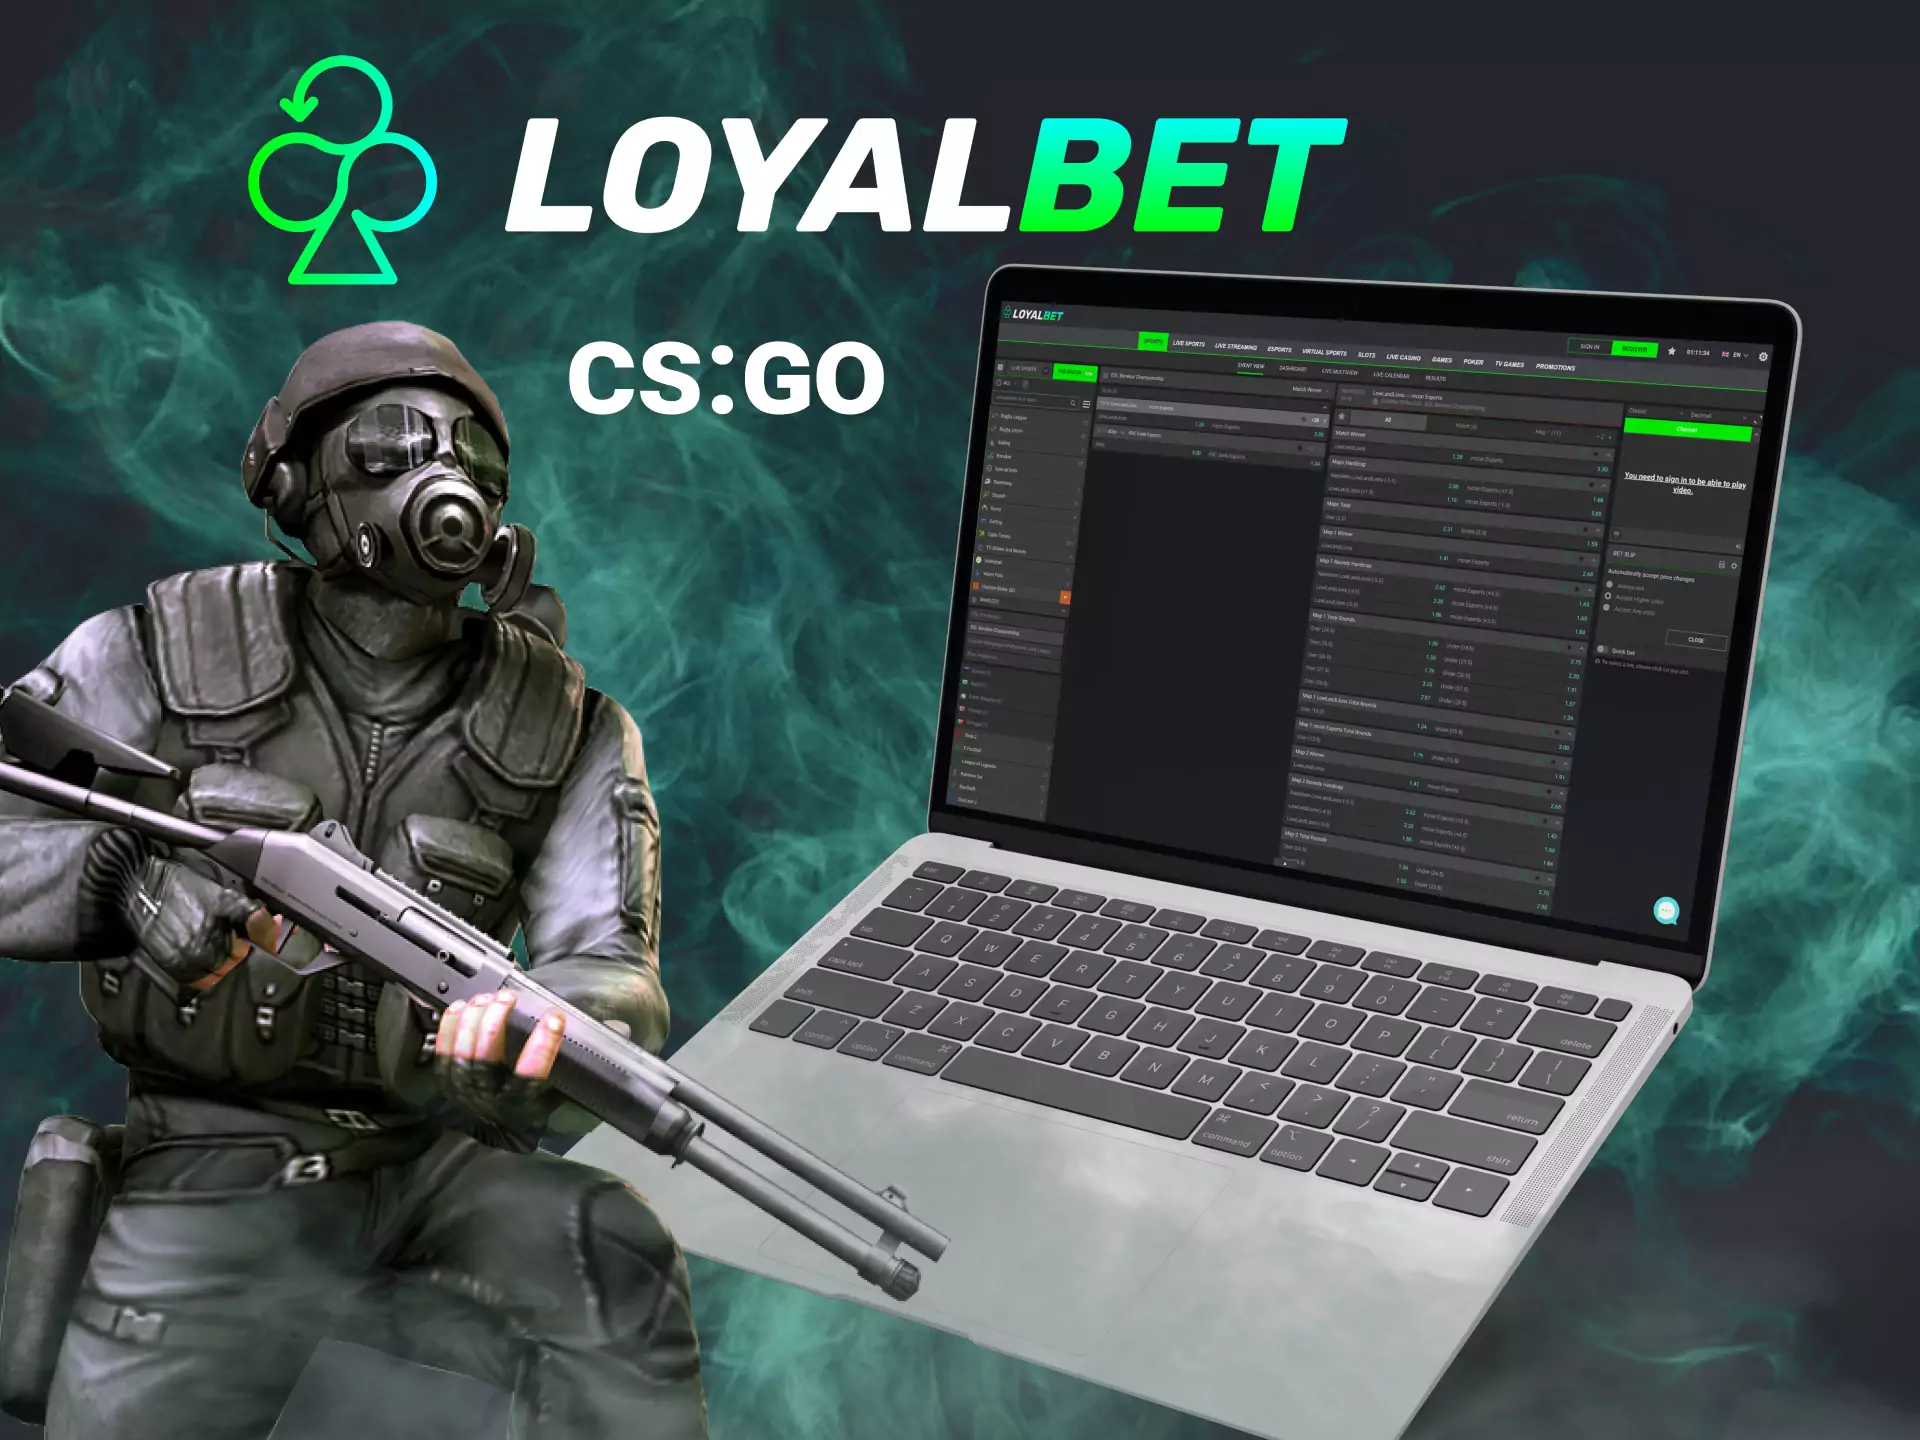 In the Loyalbet Sportsbook, you can place a bet on a CS:GO match.